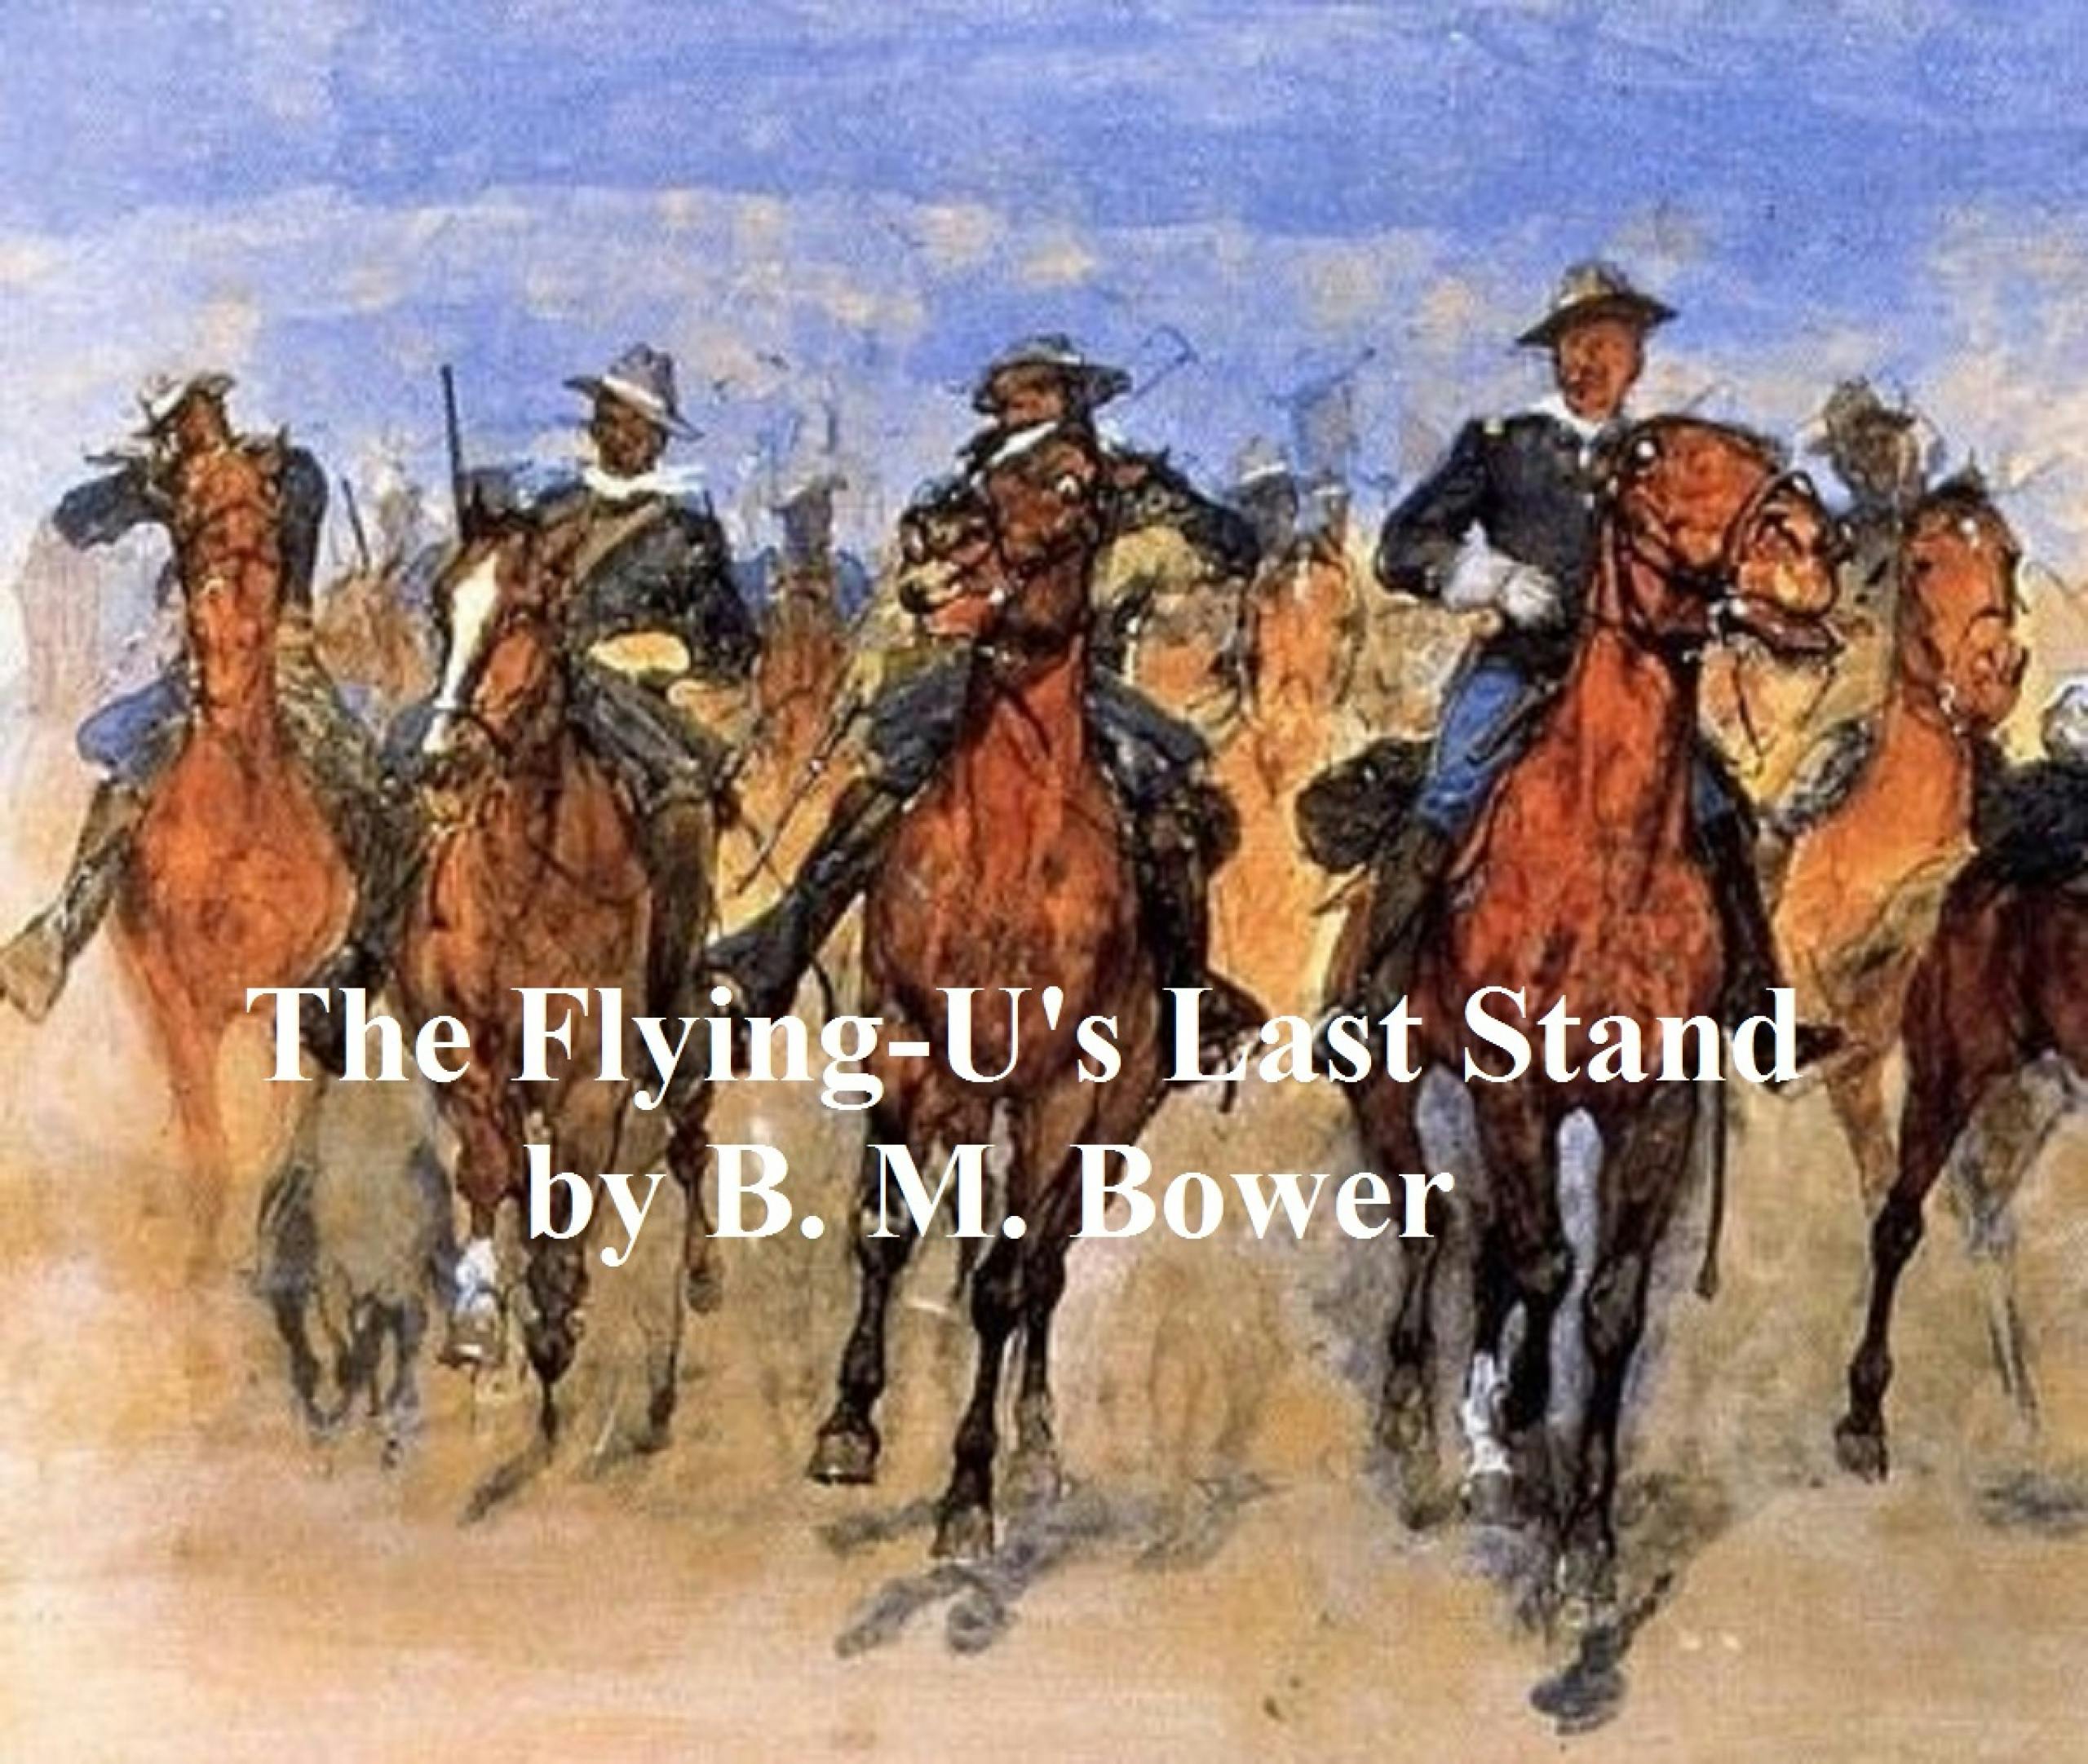 The Flying-U's Last Stand - B. M. Bower